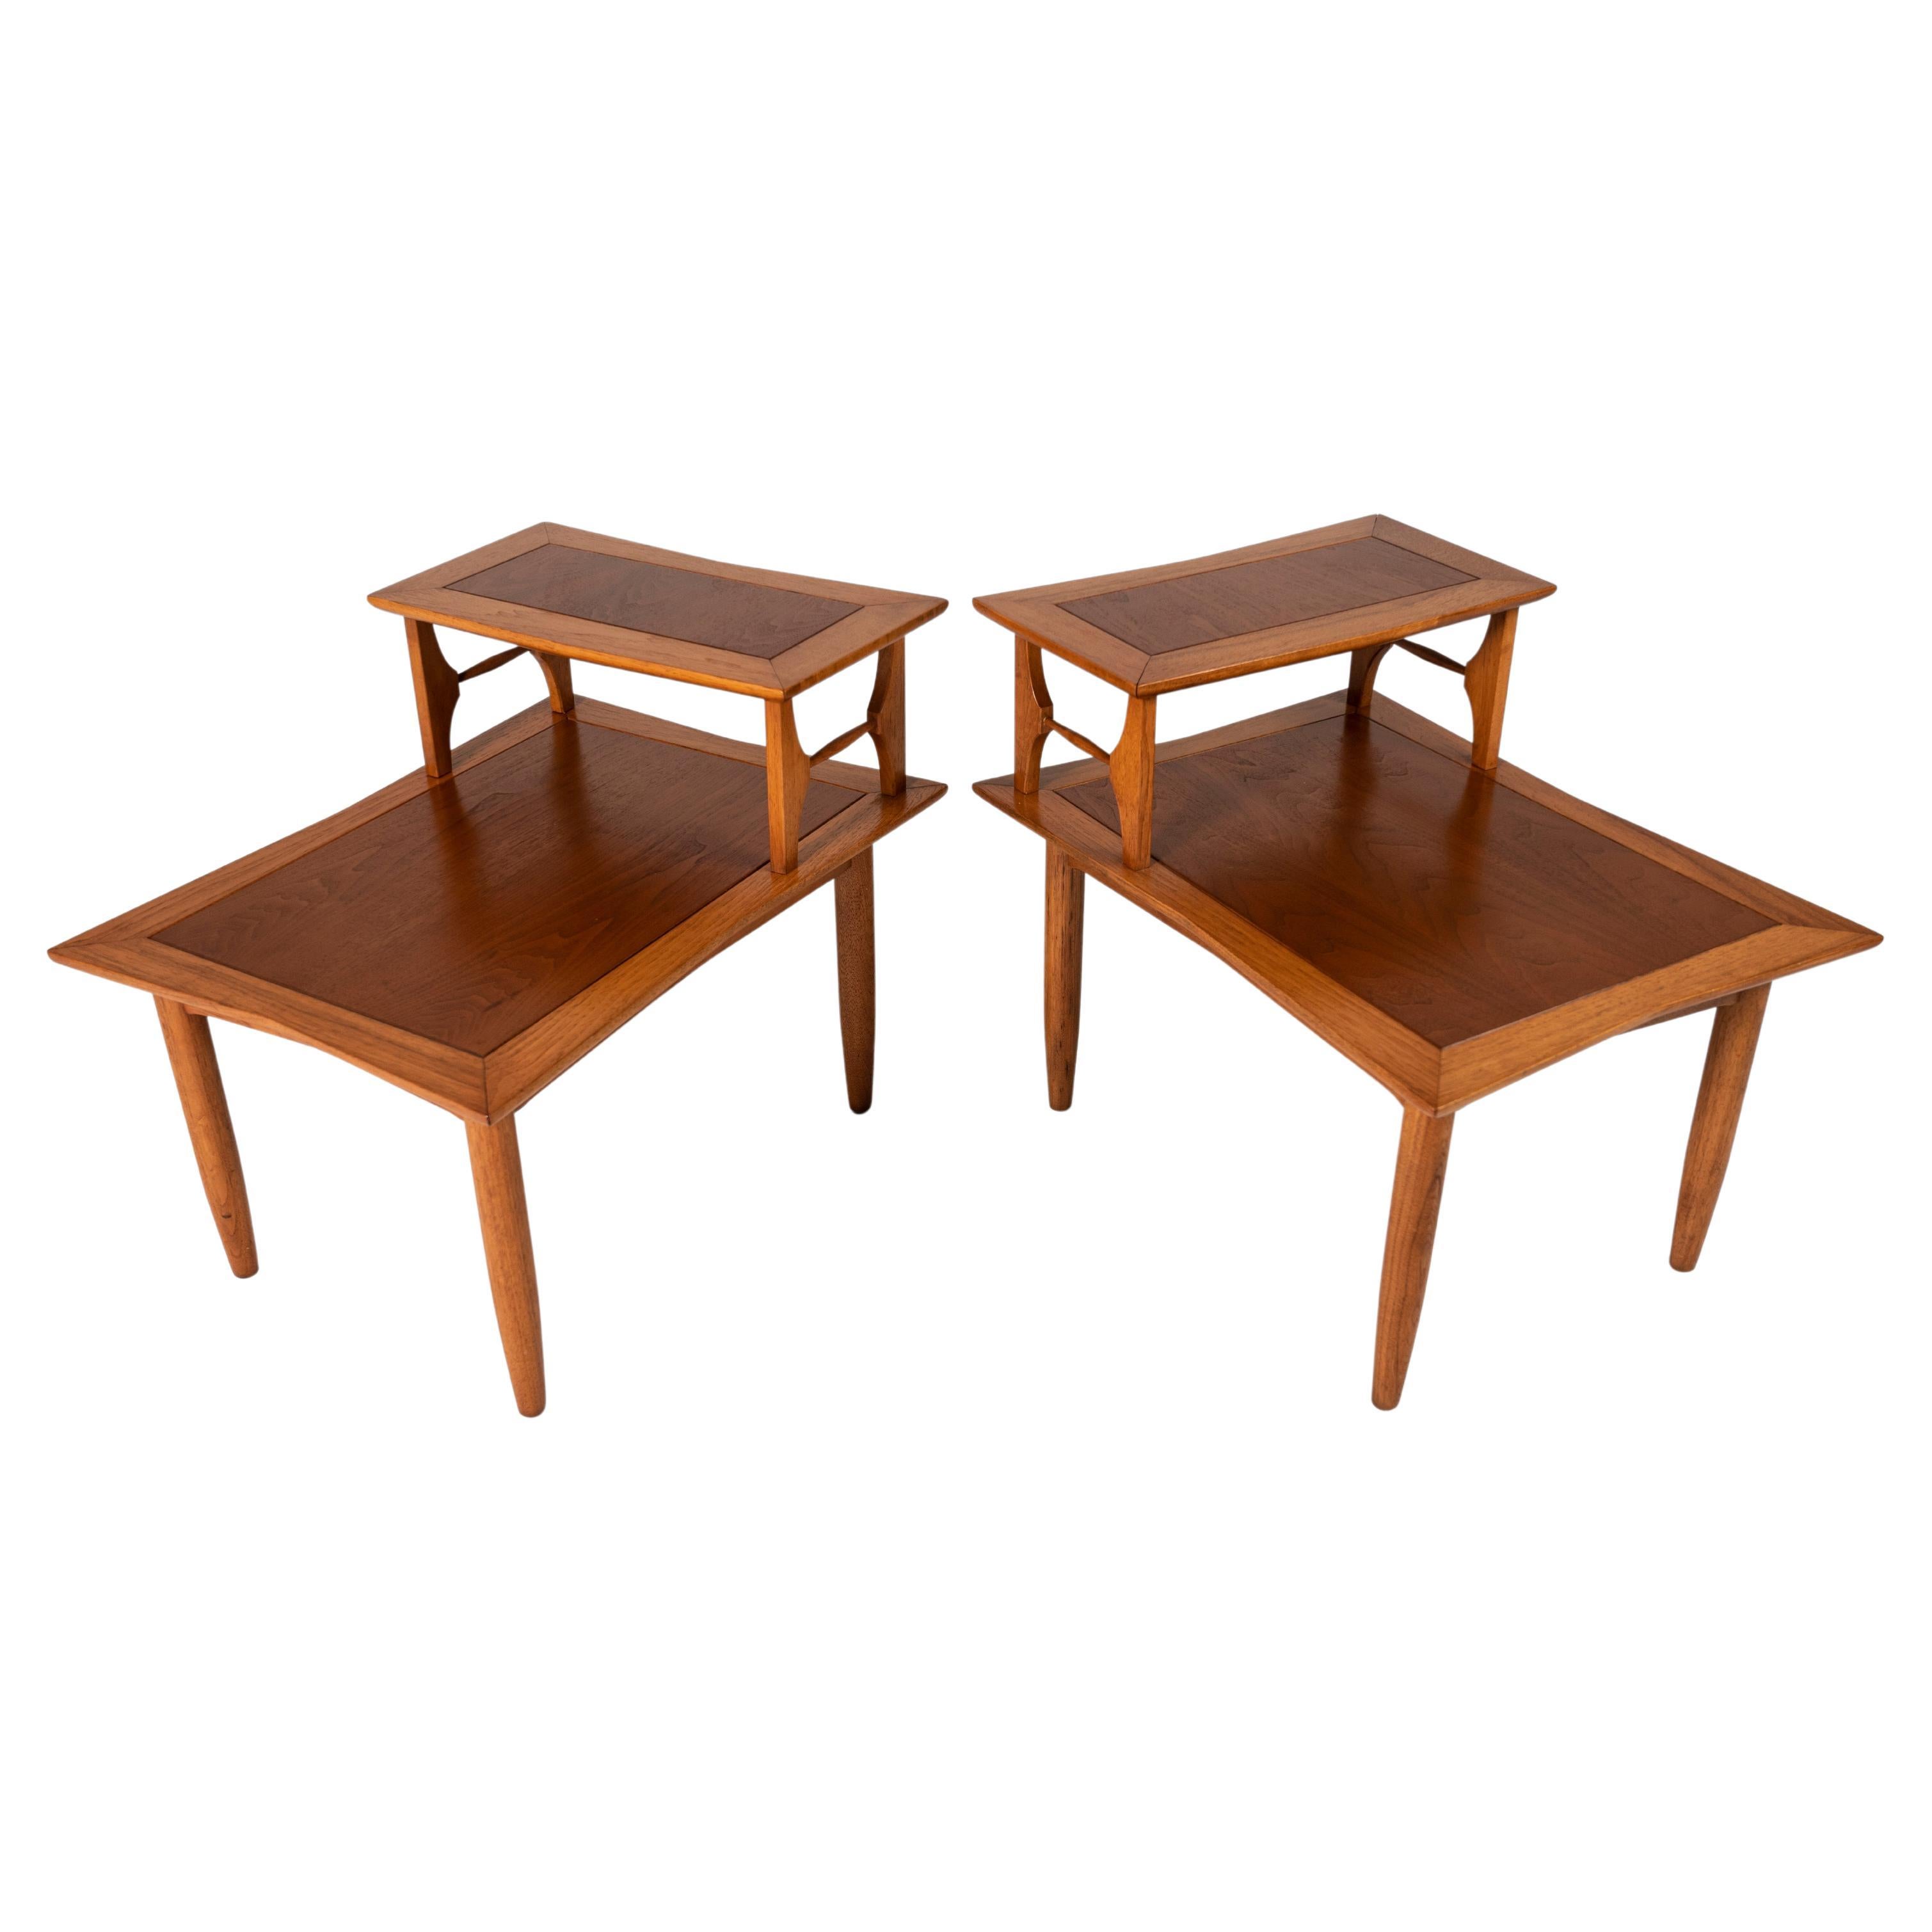 Pair of 2-Tier Mid-Century Modern End Tables Attributed to Lubberts & Mulder